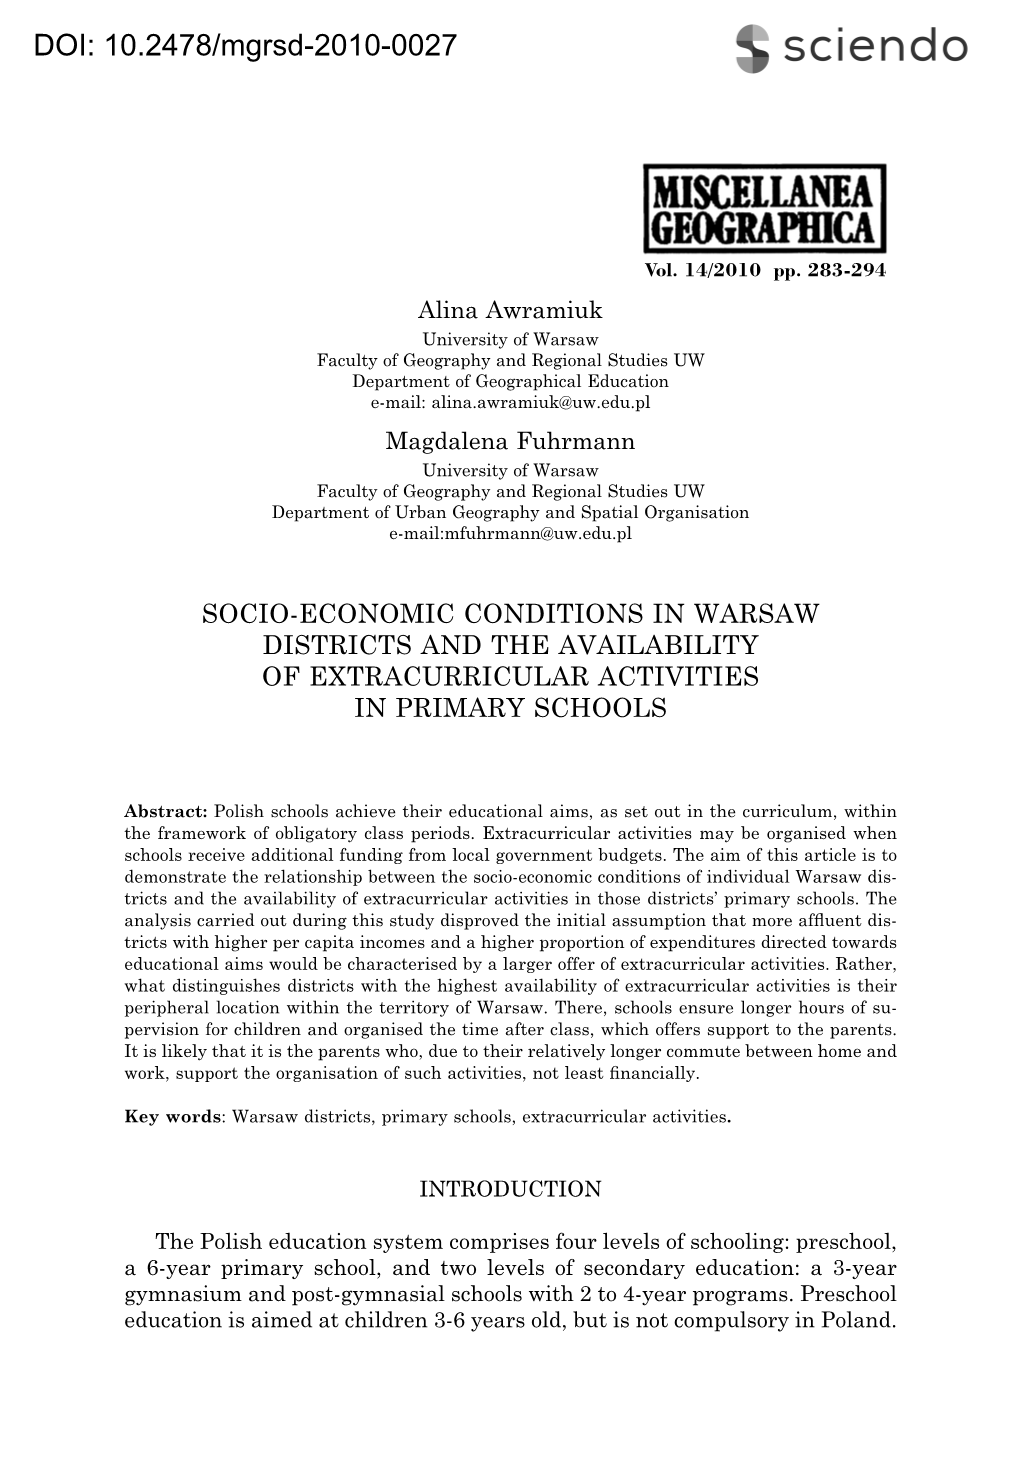 Socio-Economic Conditions in Warsaw Districts and the Availability of Extracurricular Activities in Primary Schools